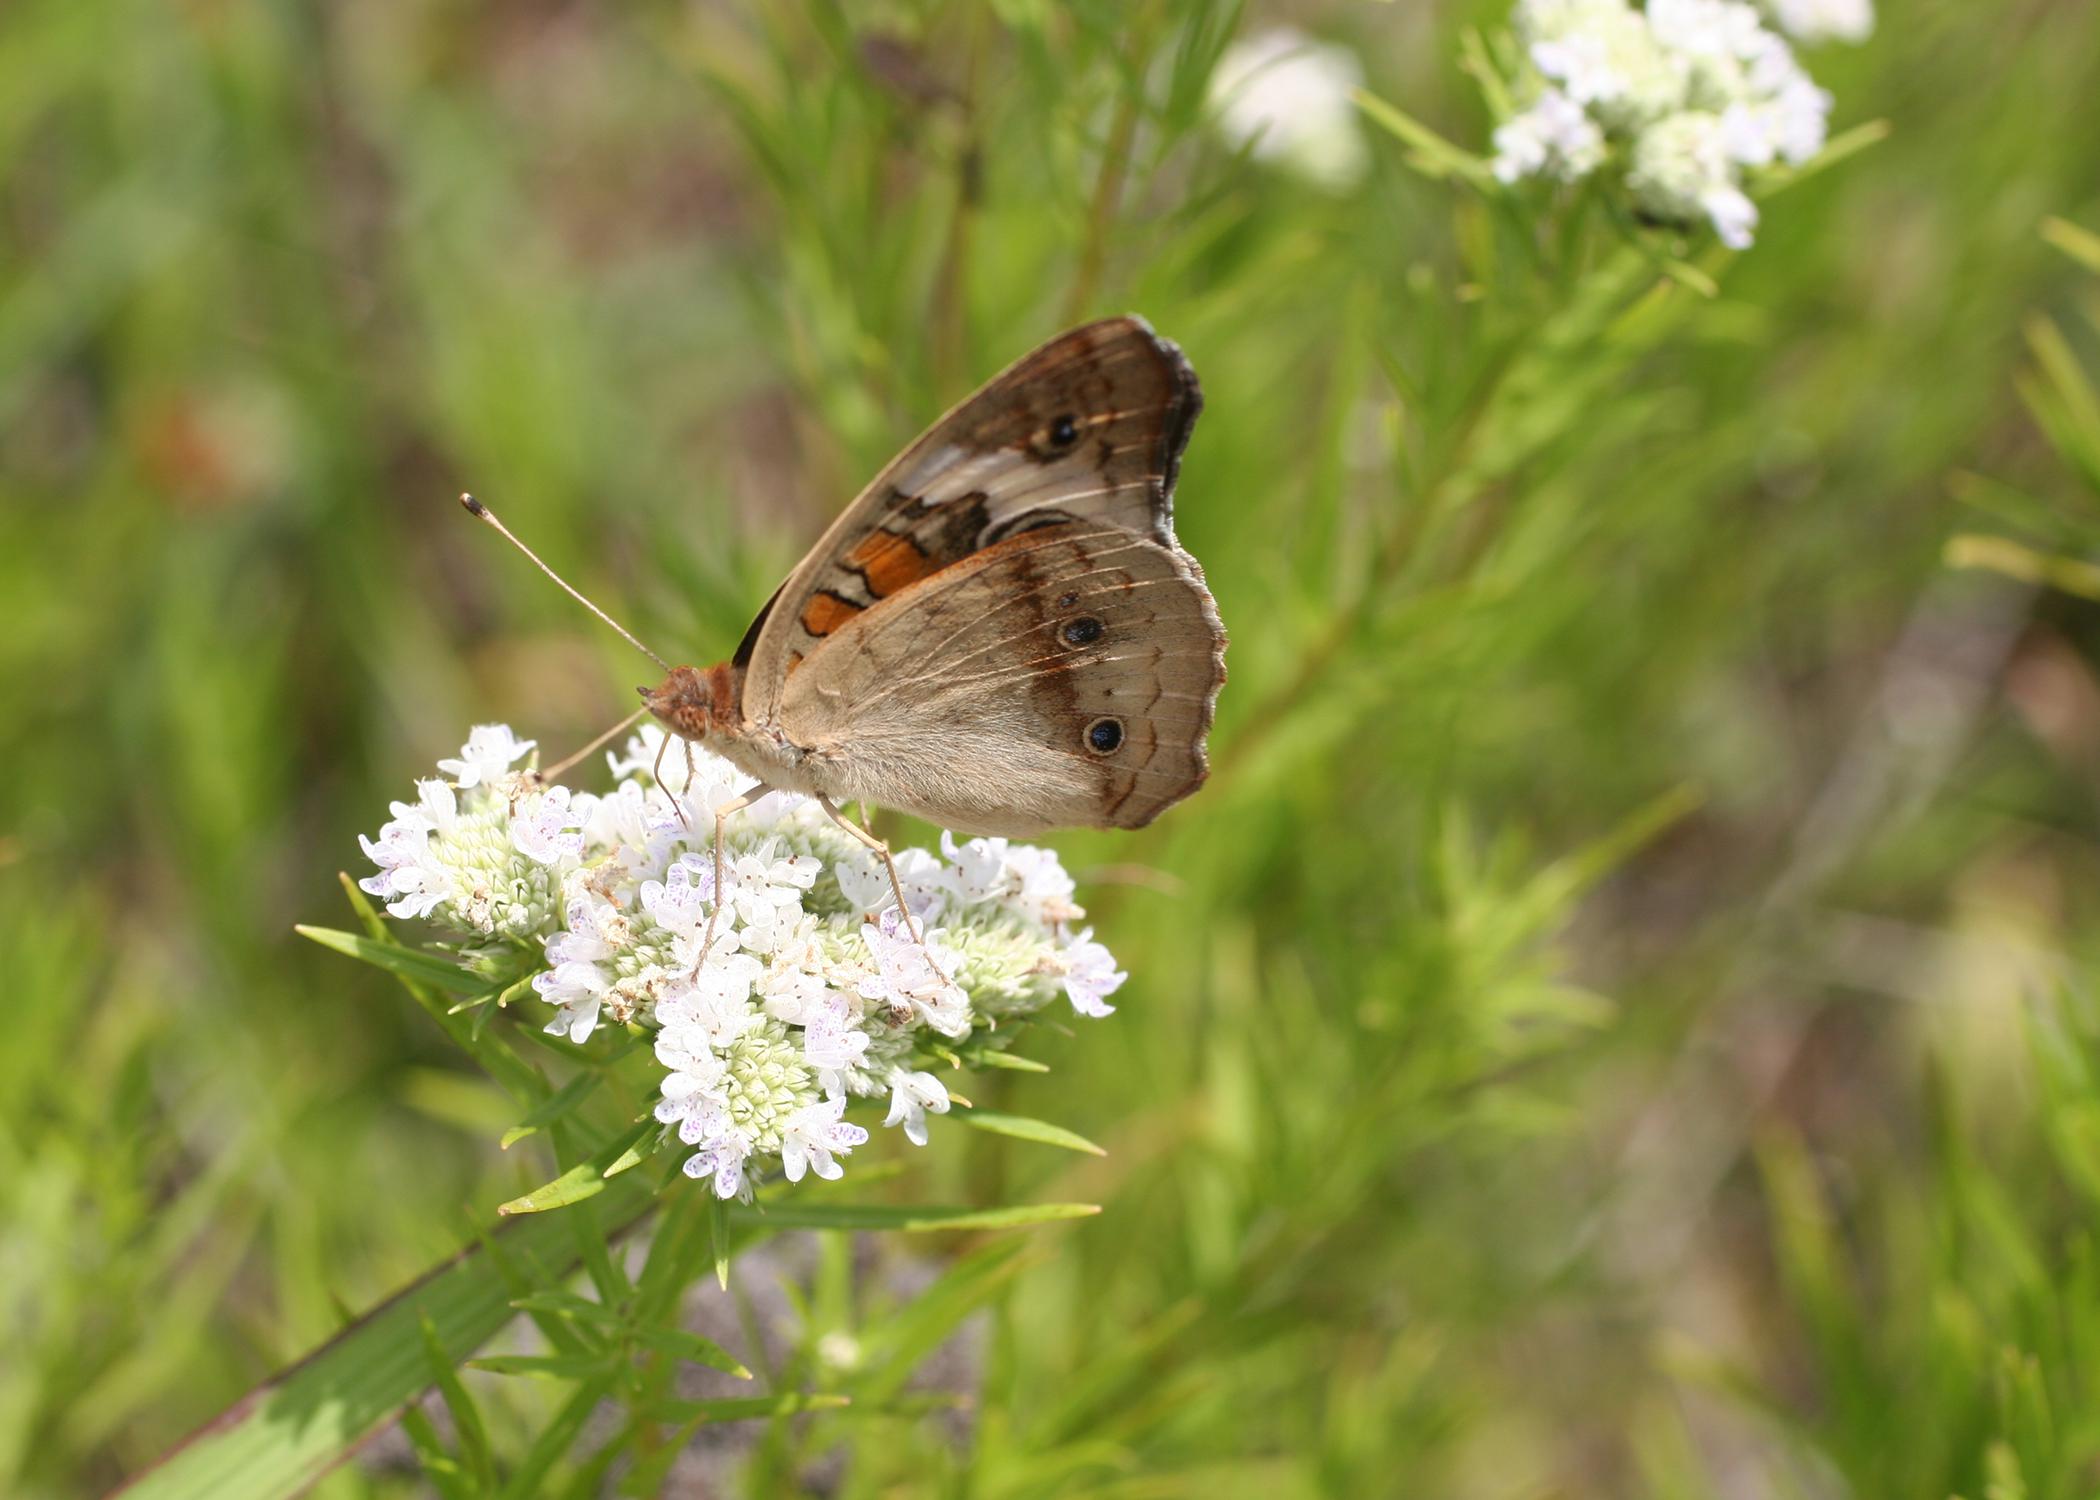 Using native plants in the landscape will attract a variety of pollinators, such as this buckeye butterfly. (Submitted photo)